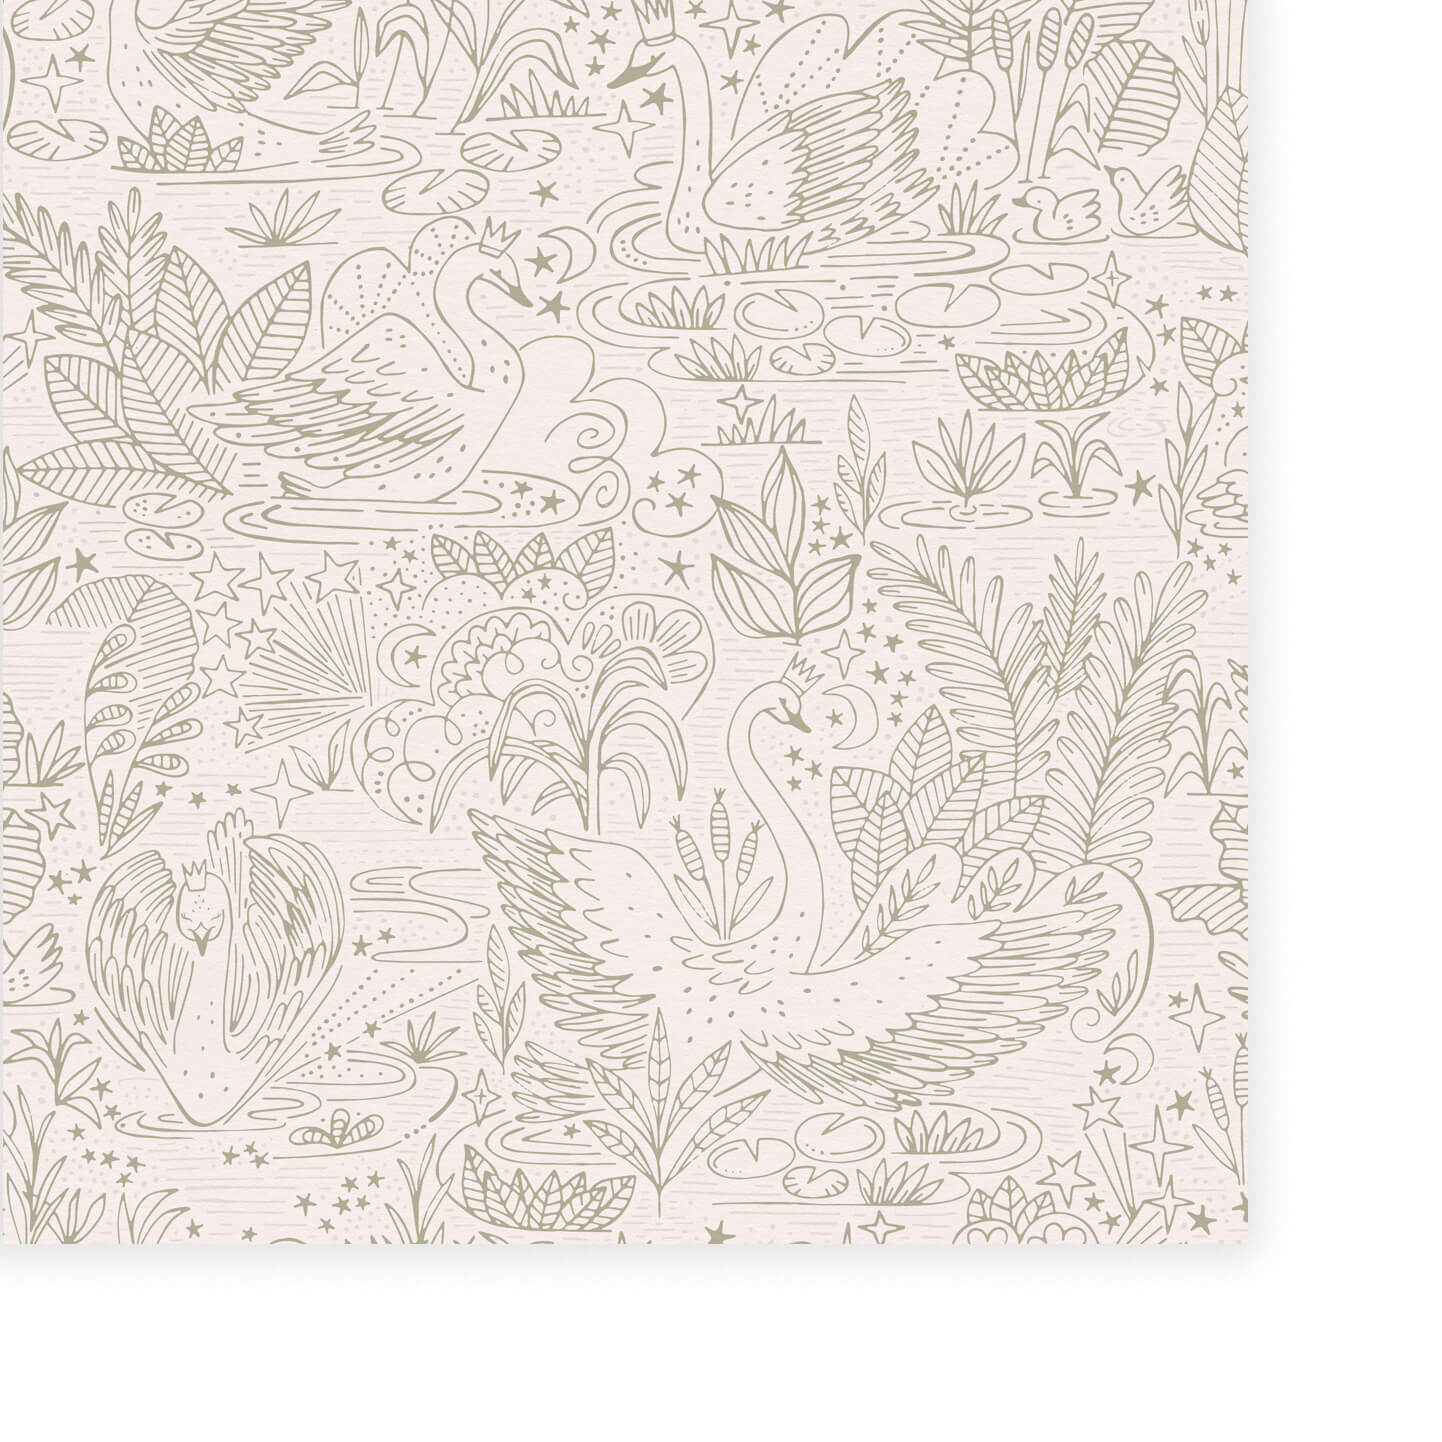 Wallpaper of very detailed floral print with swans gliding across a lake, flowers and leaves surround them. The print is line work and is all in sage green